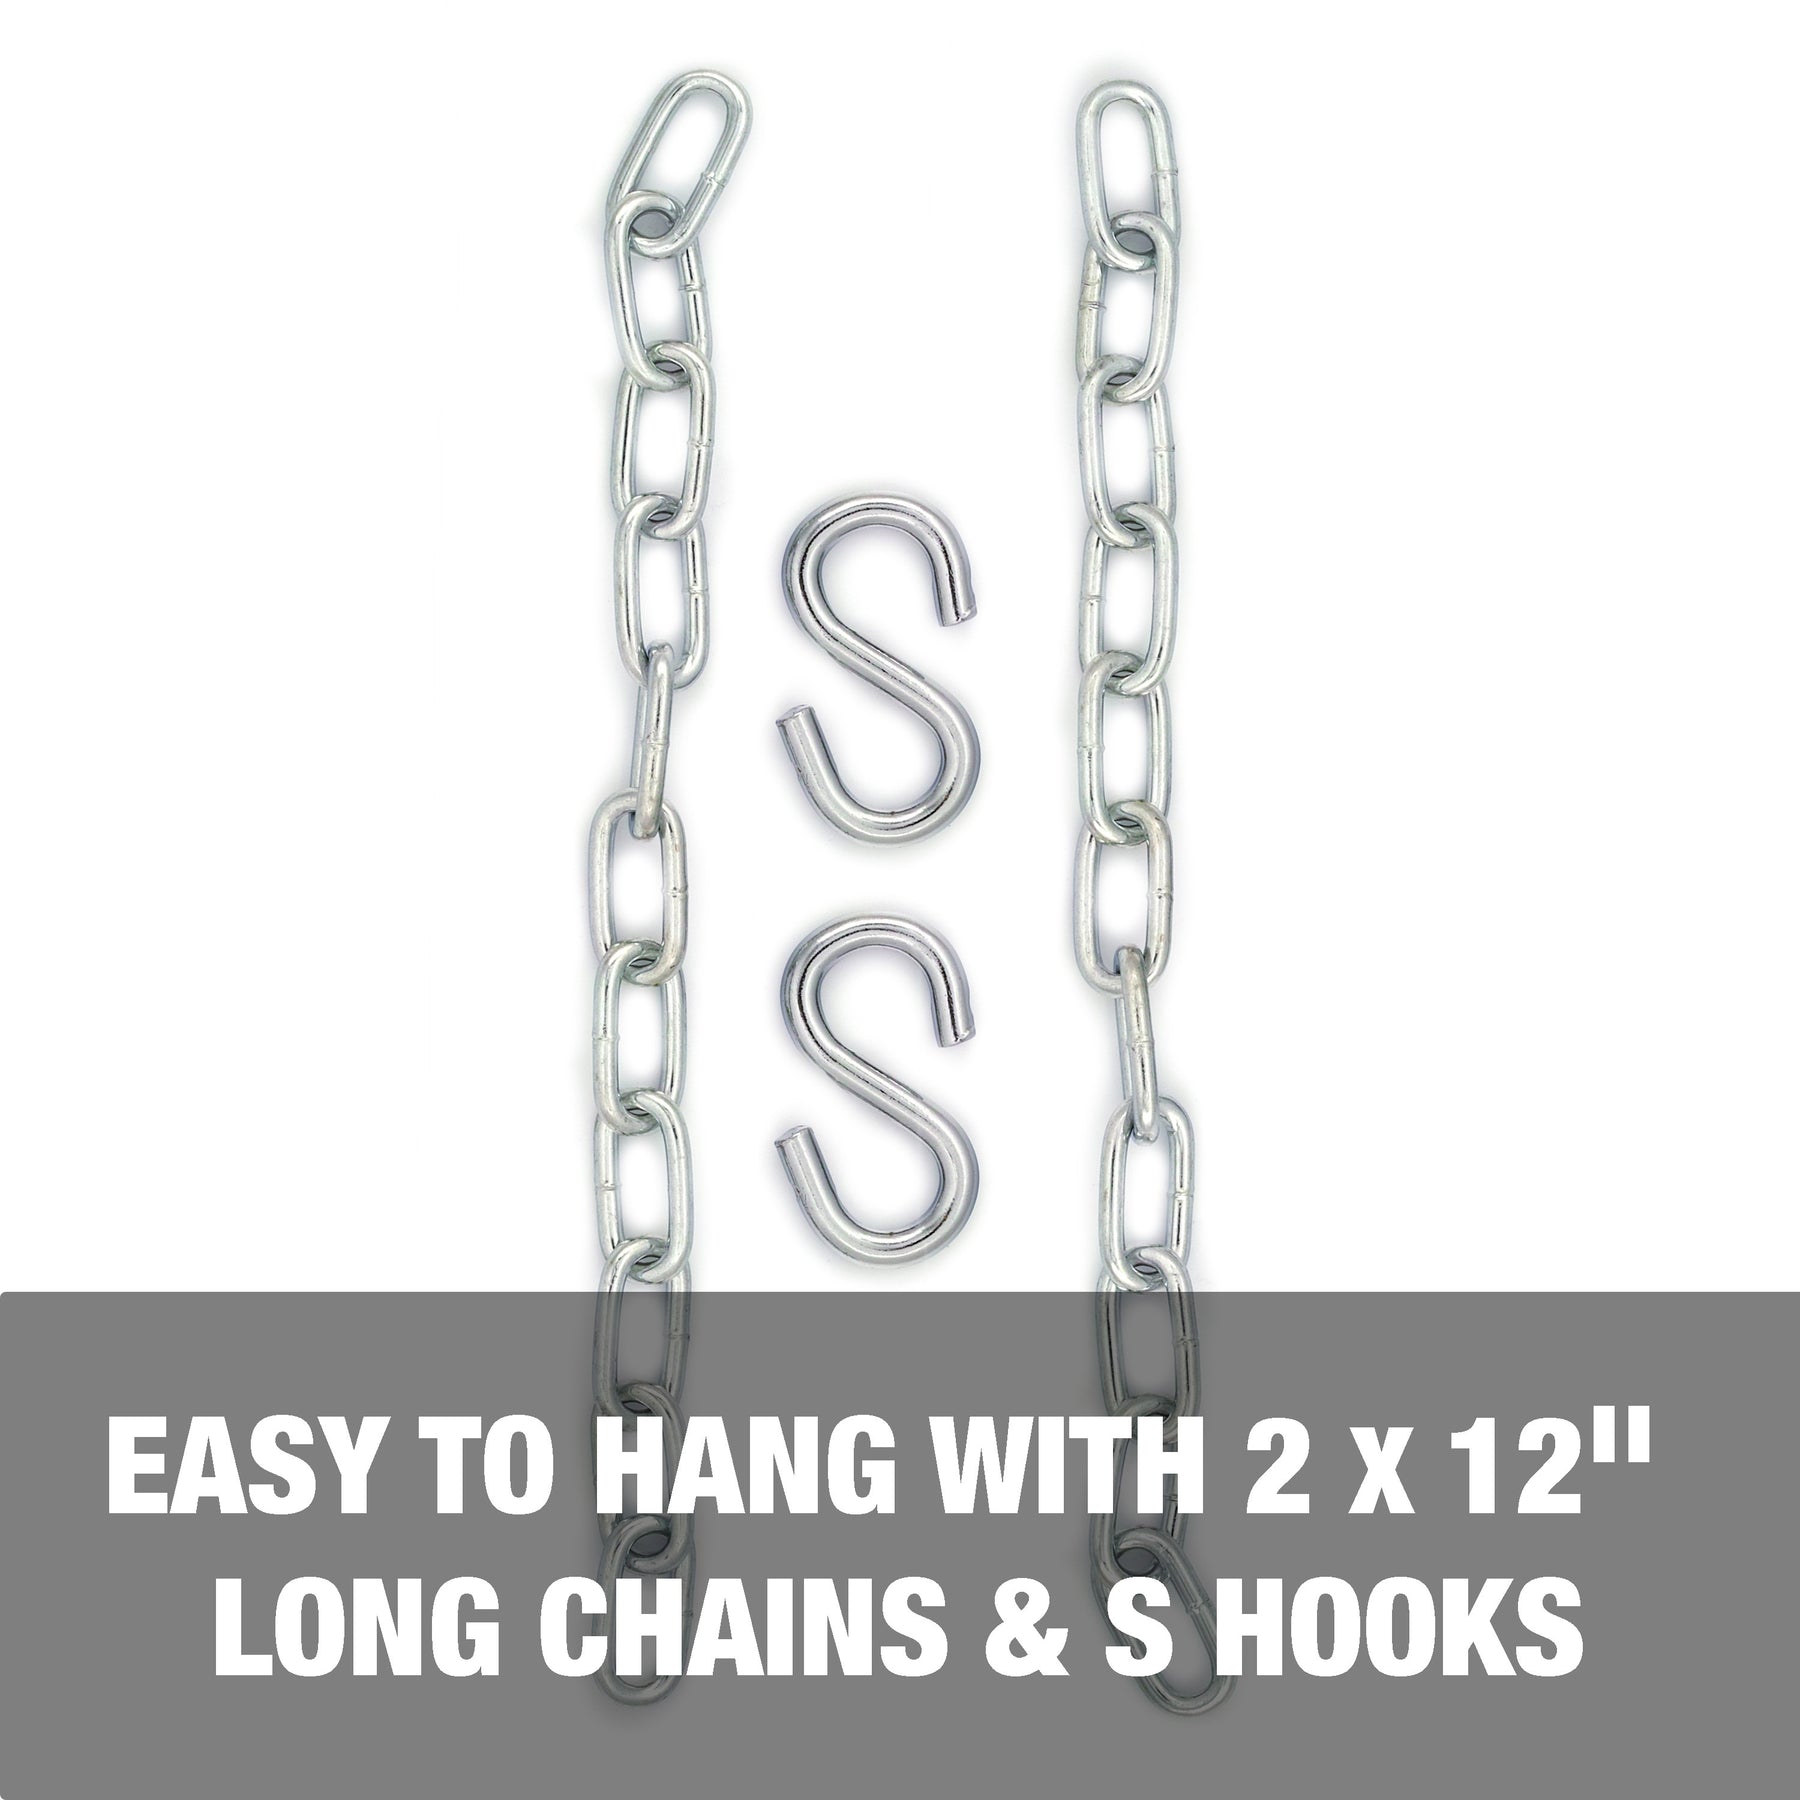 Easy to hang with 2 12-inch long chains and S-hooks.